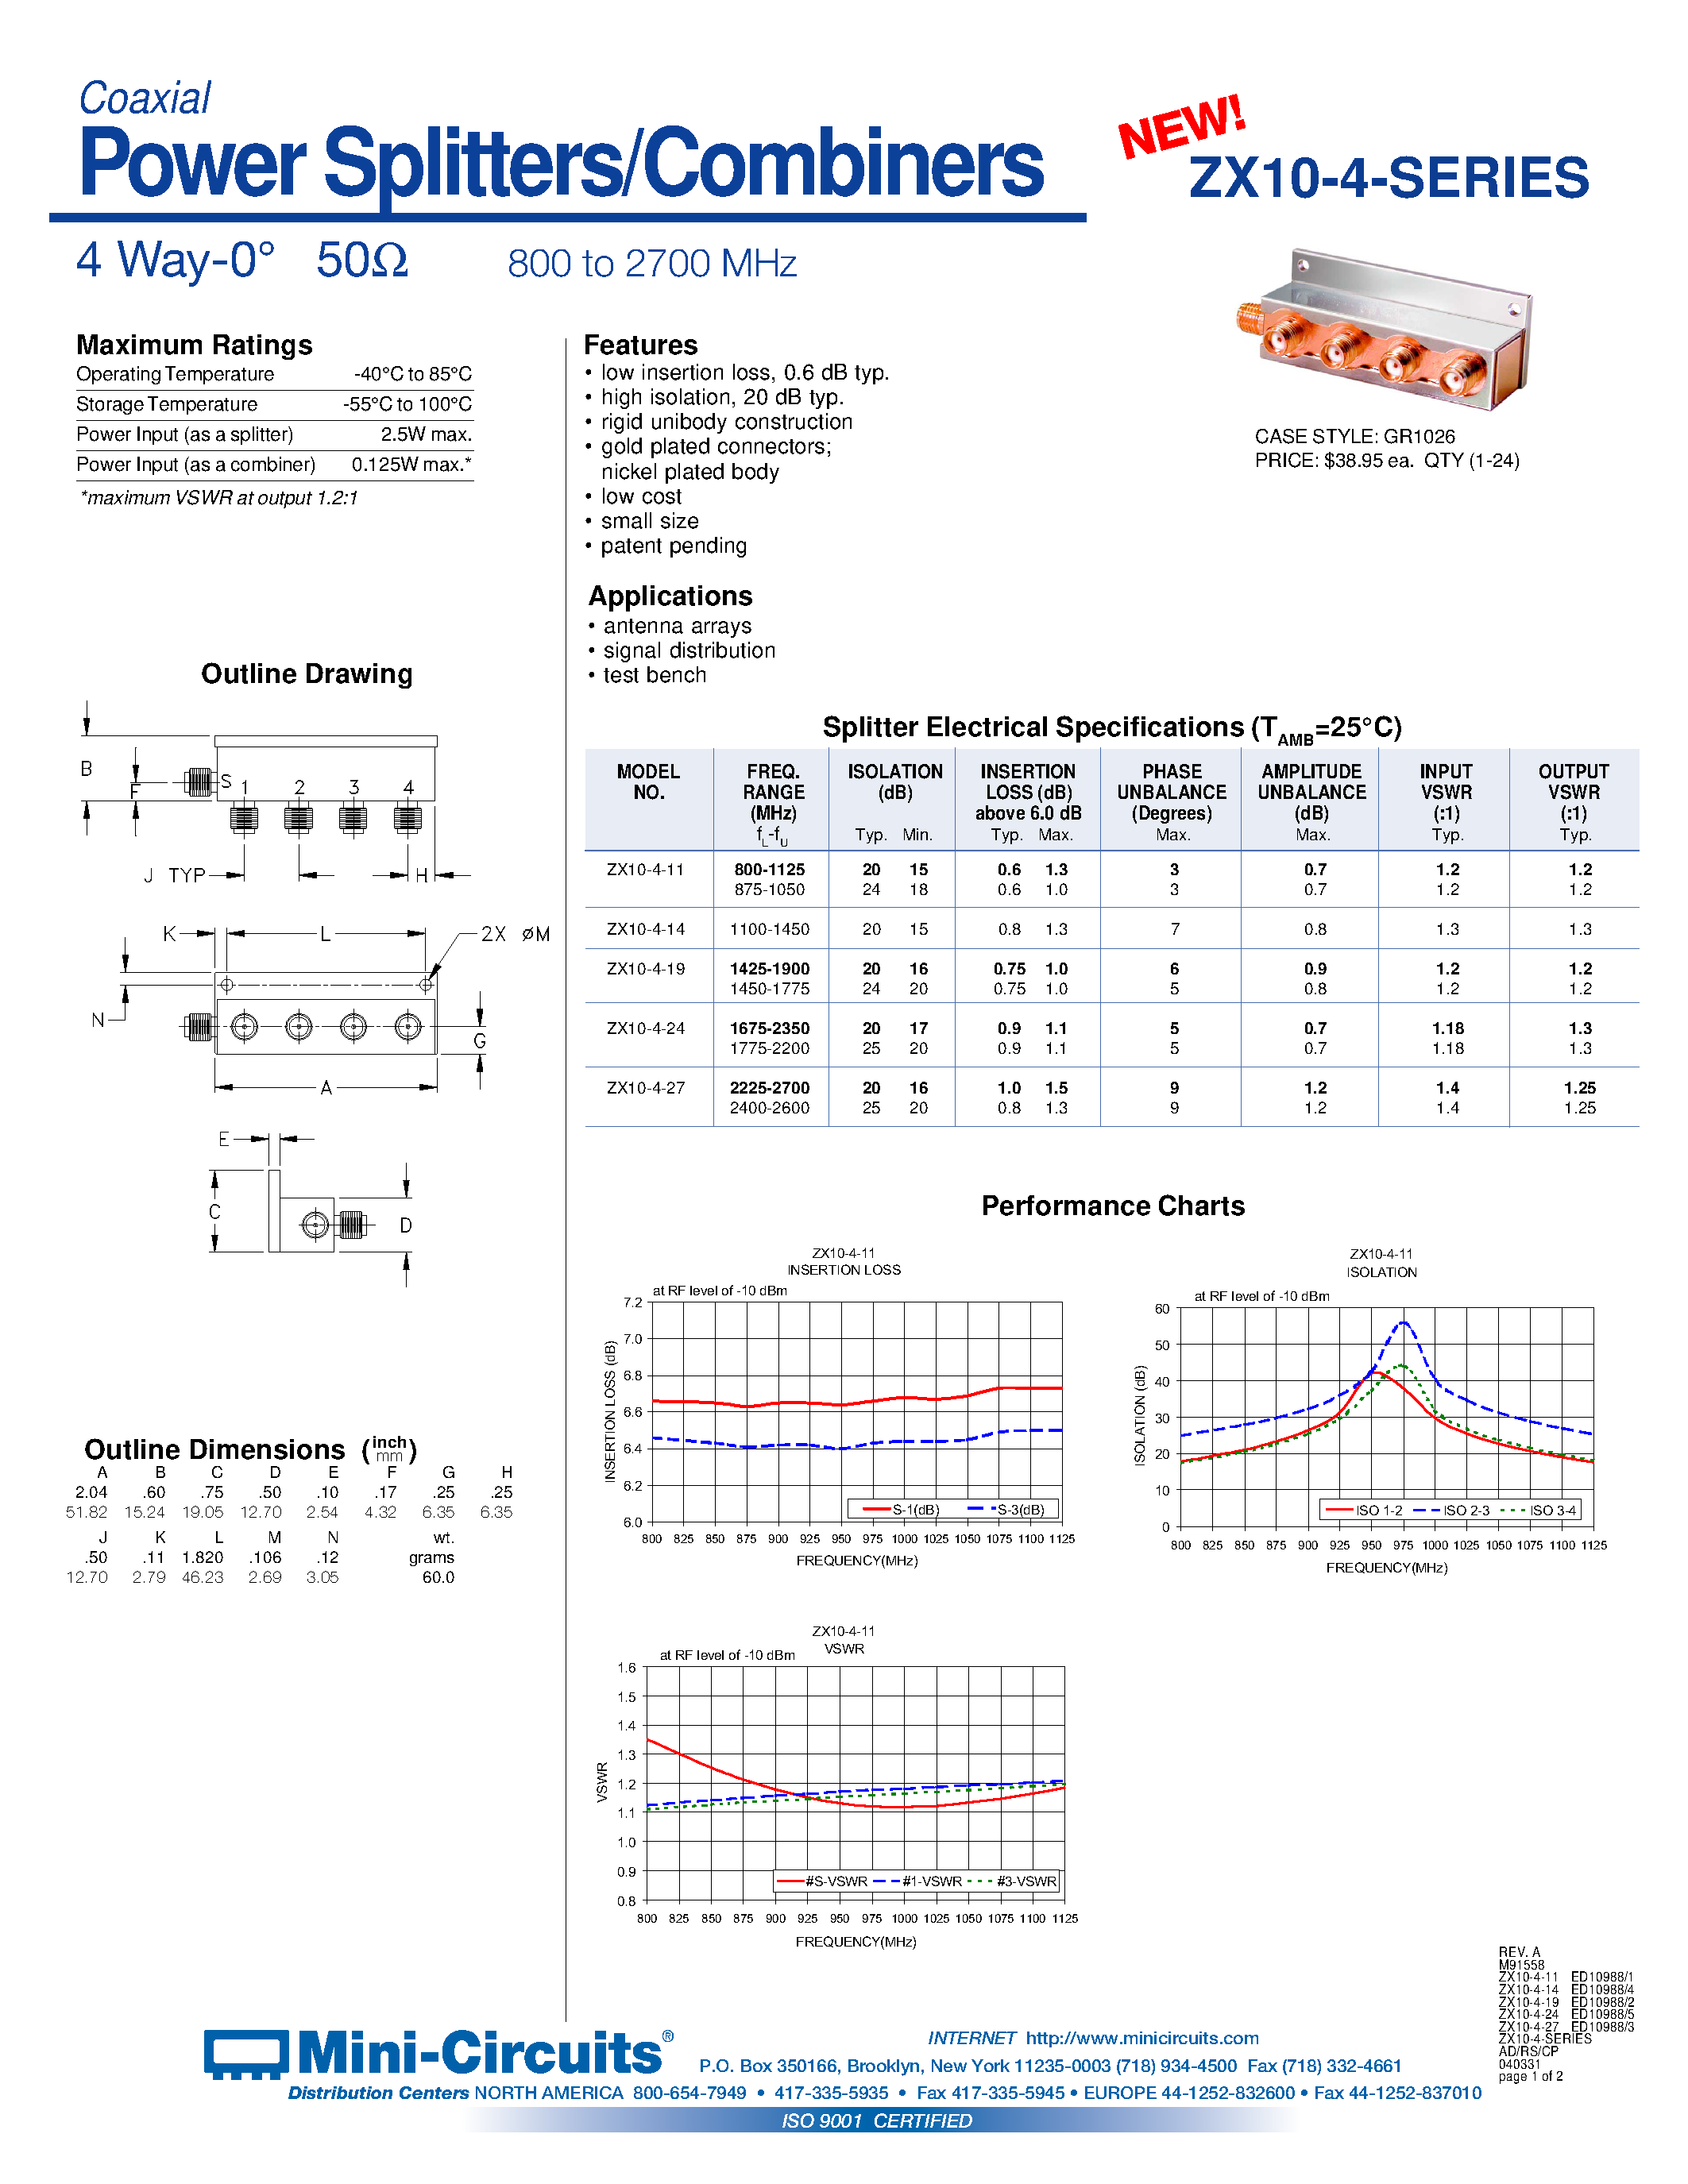 Datasheet ZX10-4-14 - Power Splitters/Combiners 4 Way-0 50 800 to 2700 MHz page 1